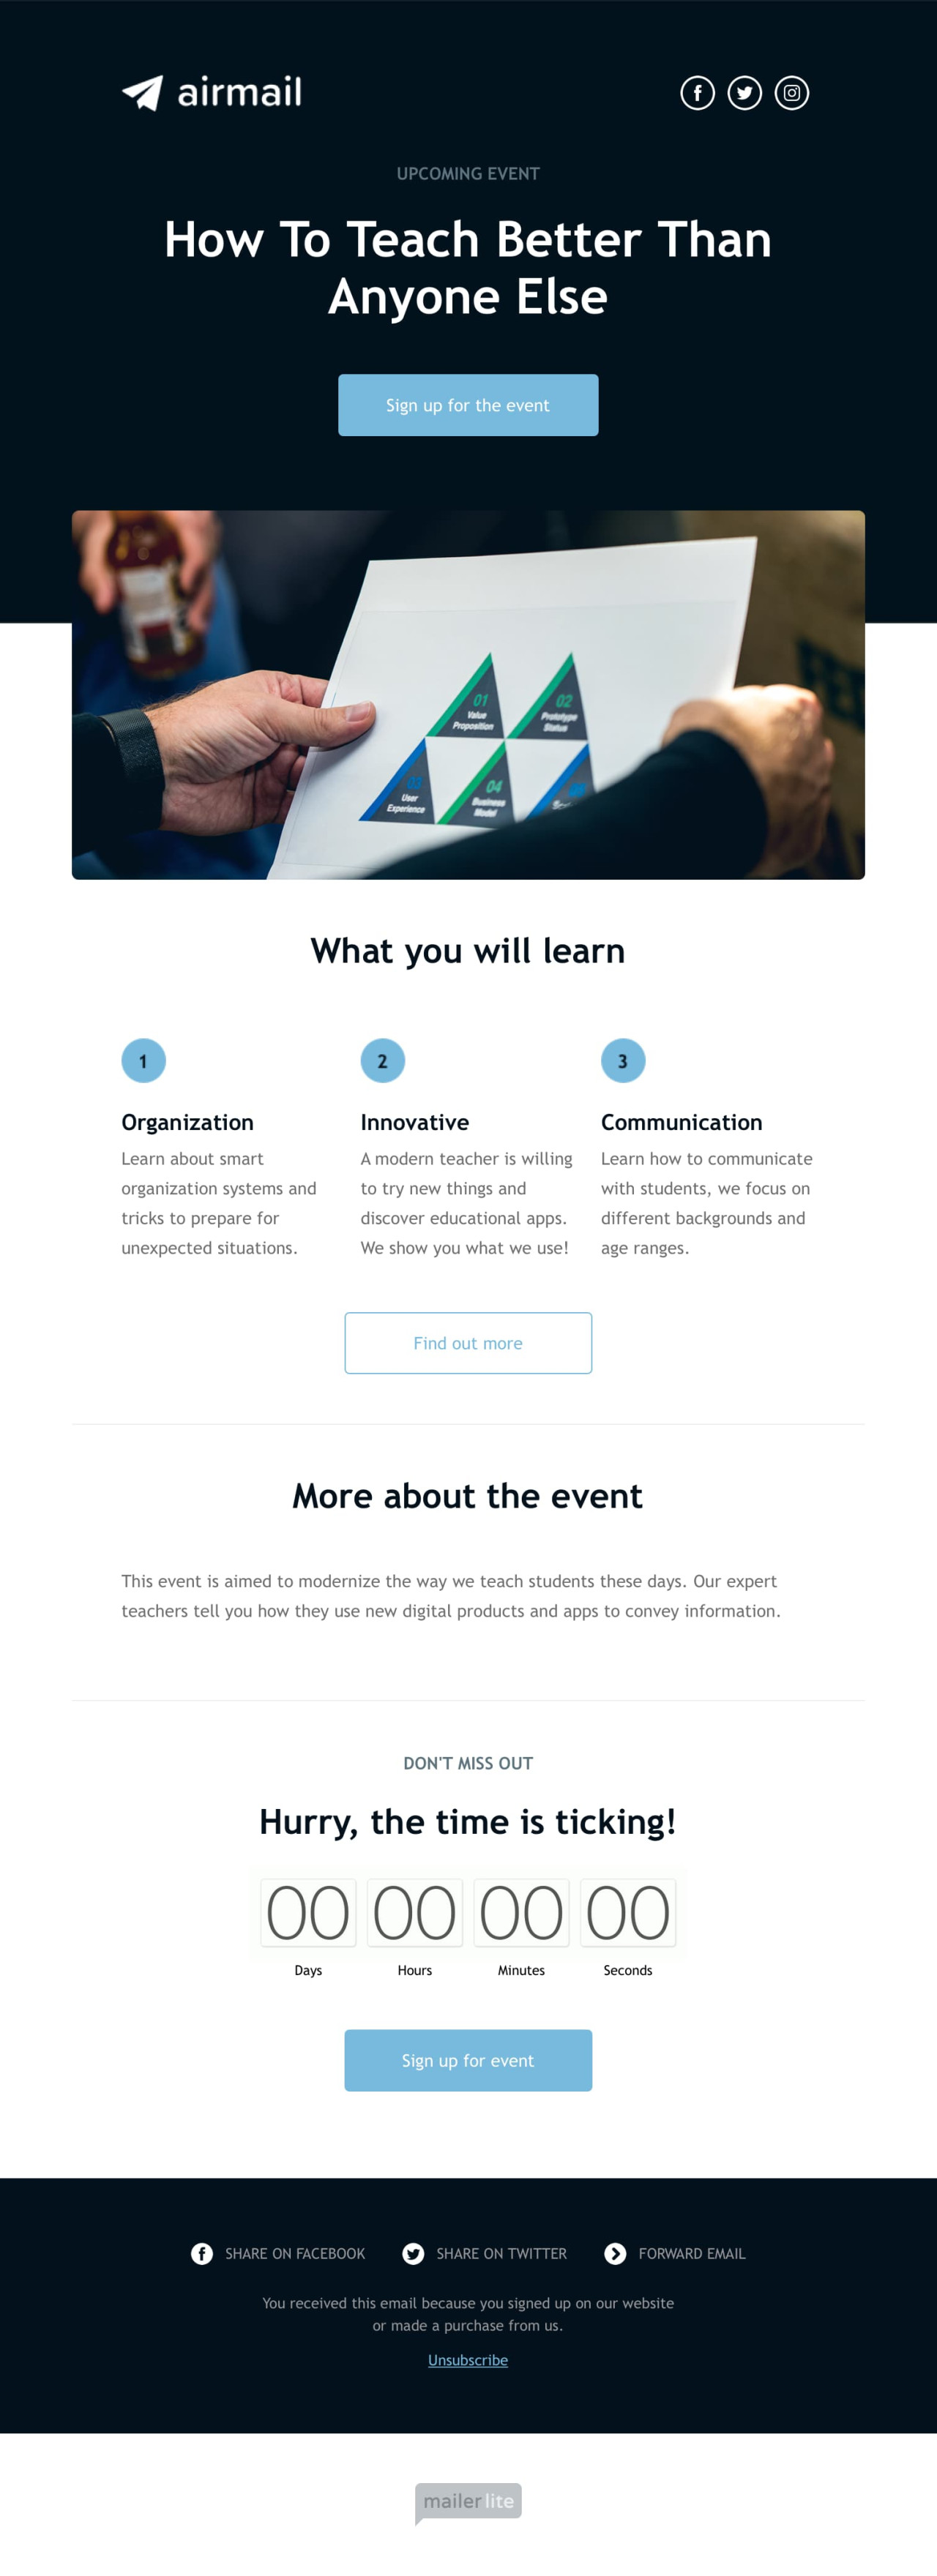 Event invitation email template - Made by MailerLite